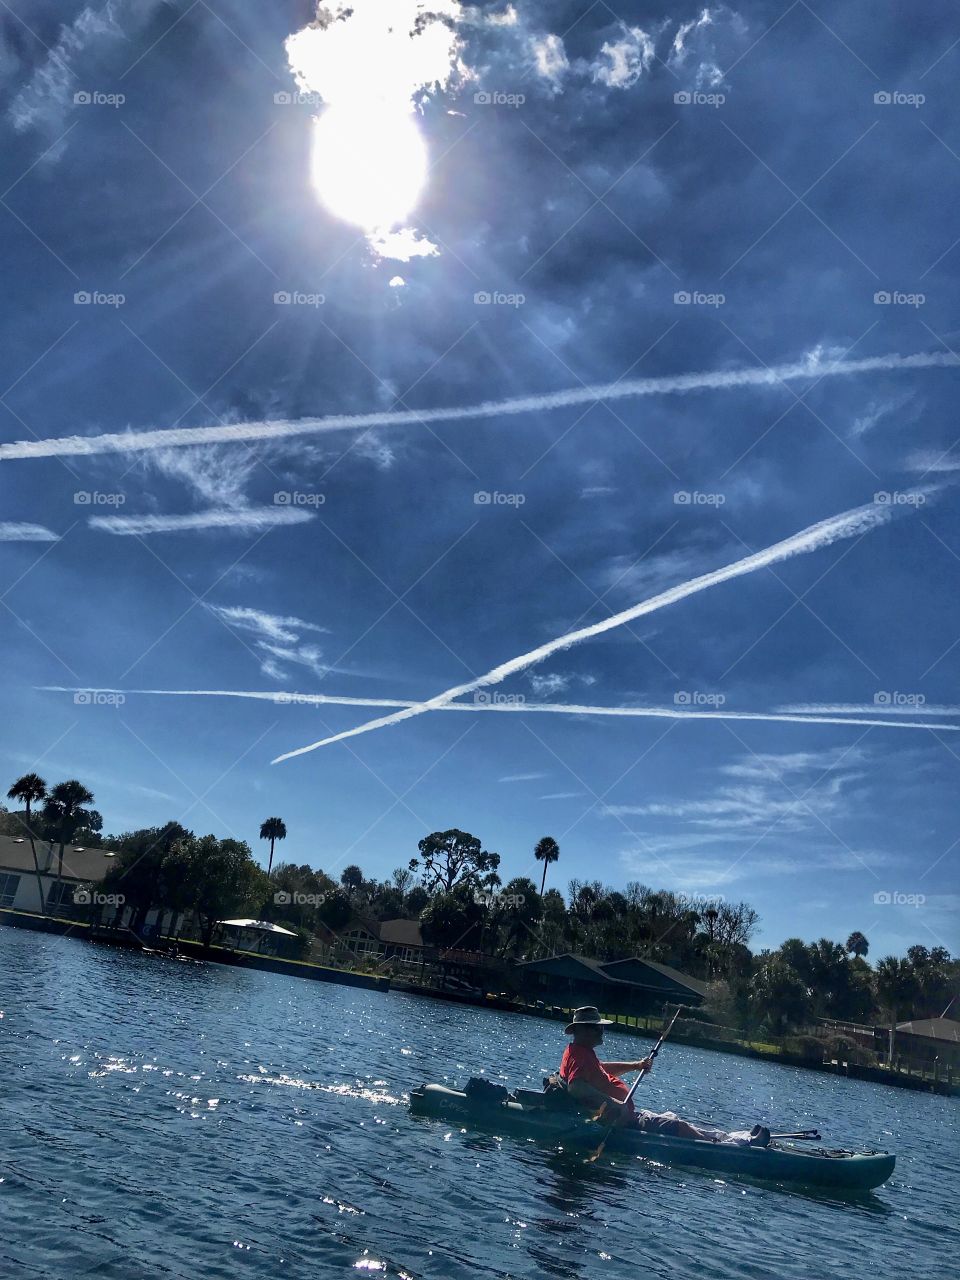 The “ x” in the sky marks the paddling spot in the river 